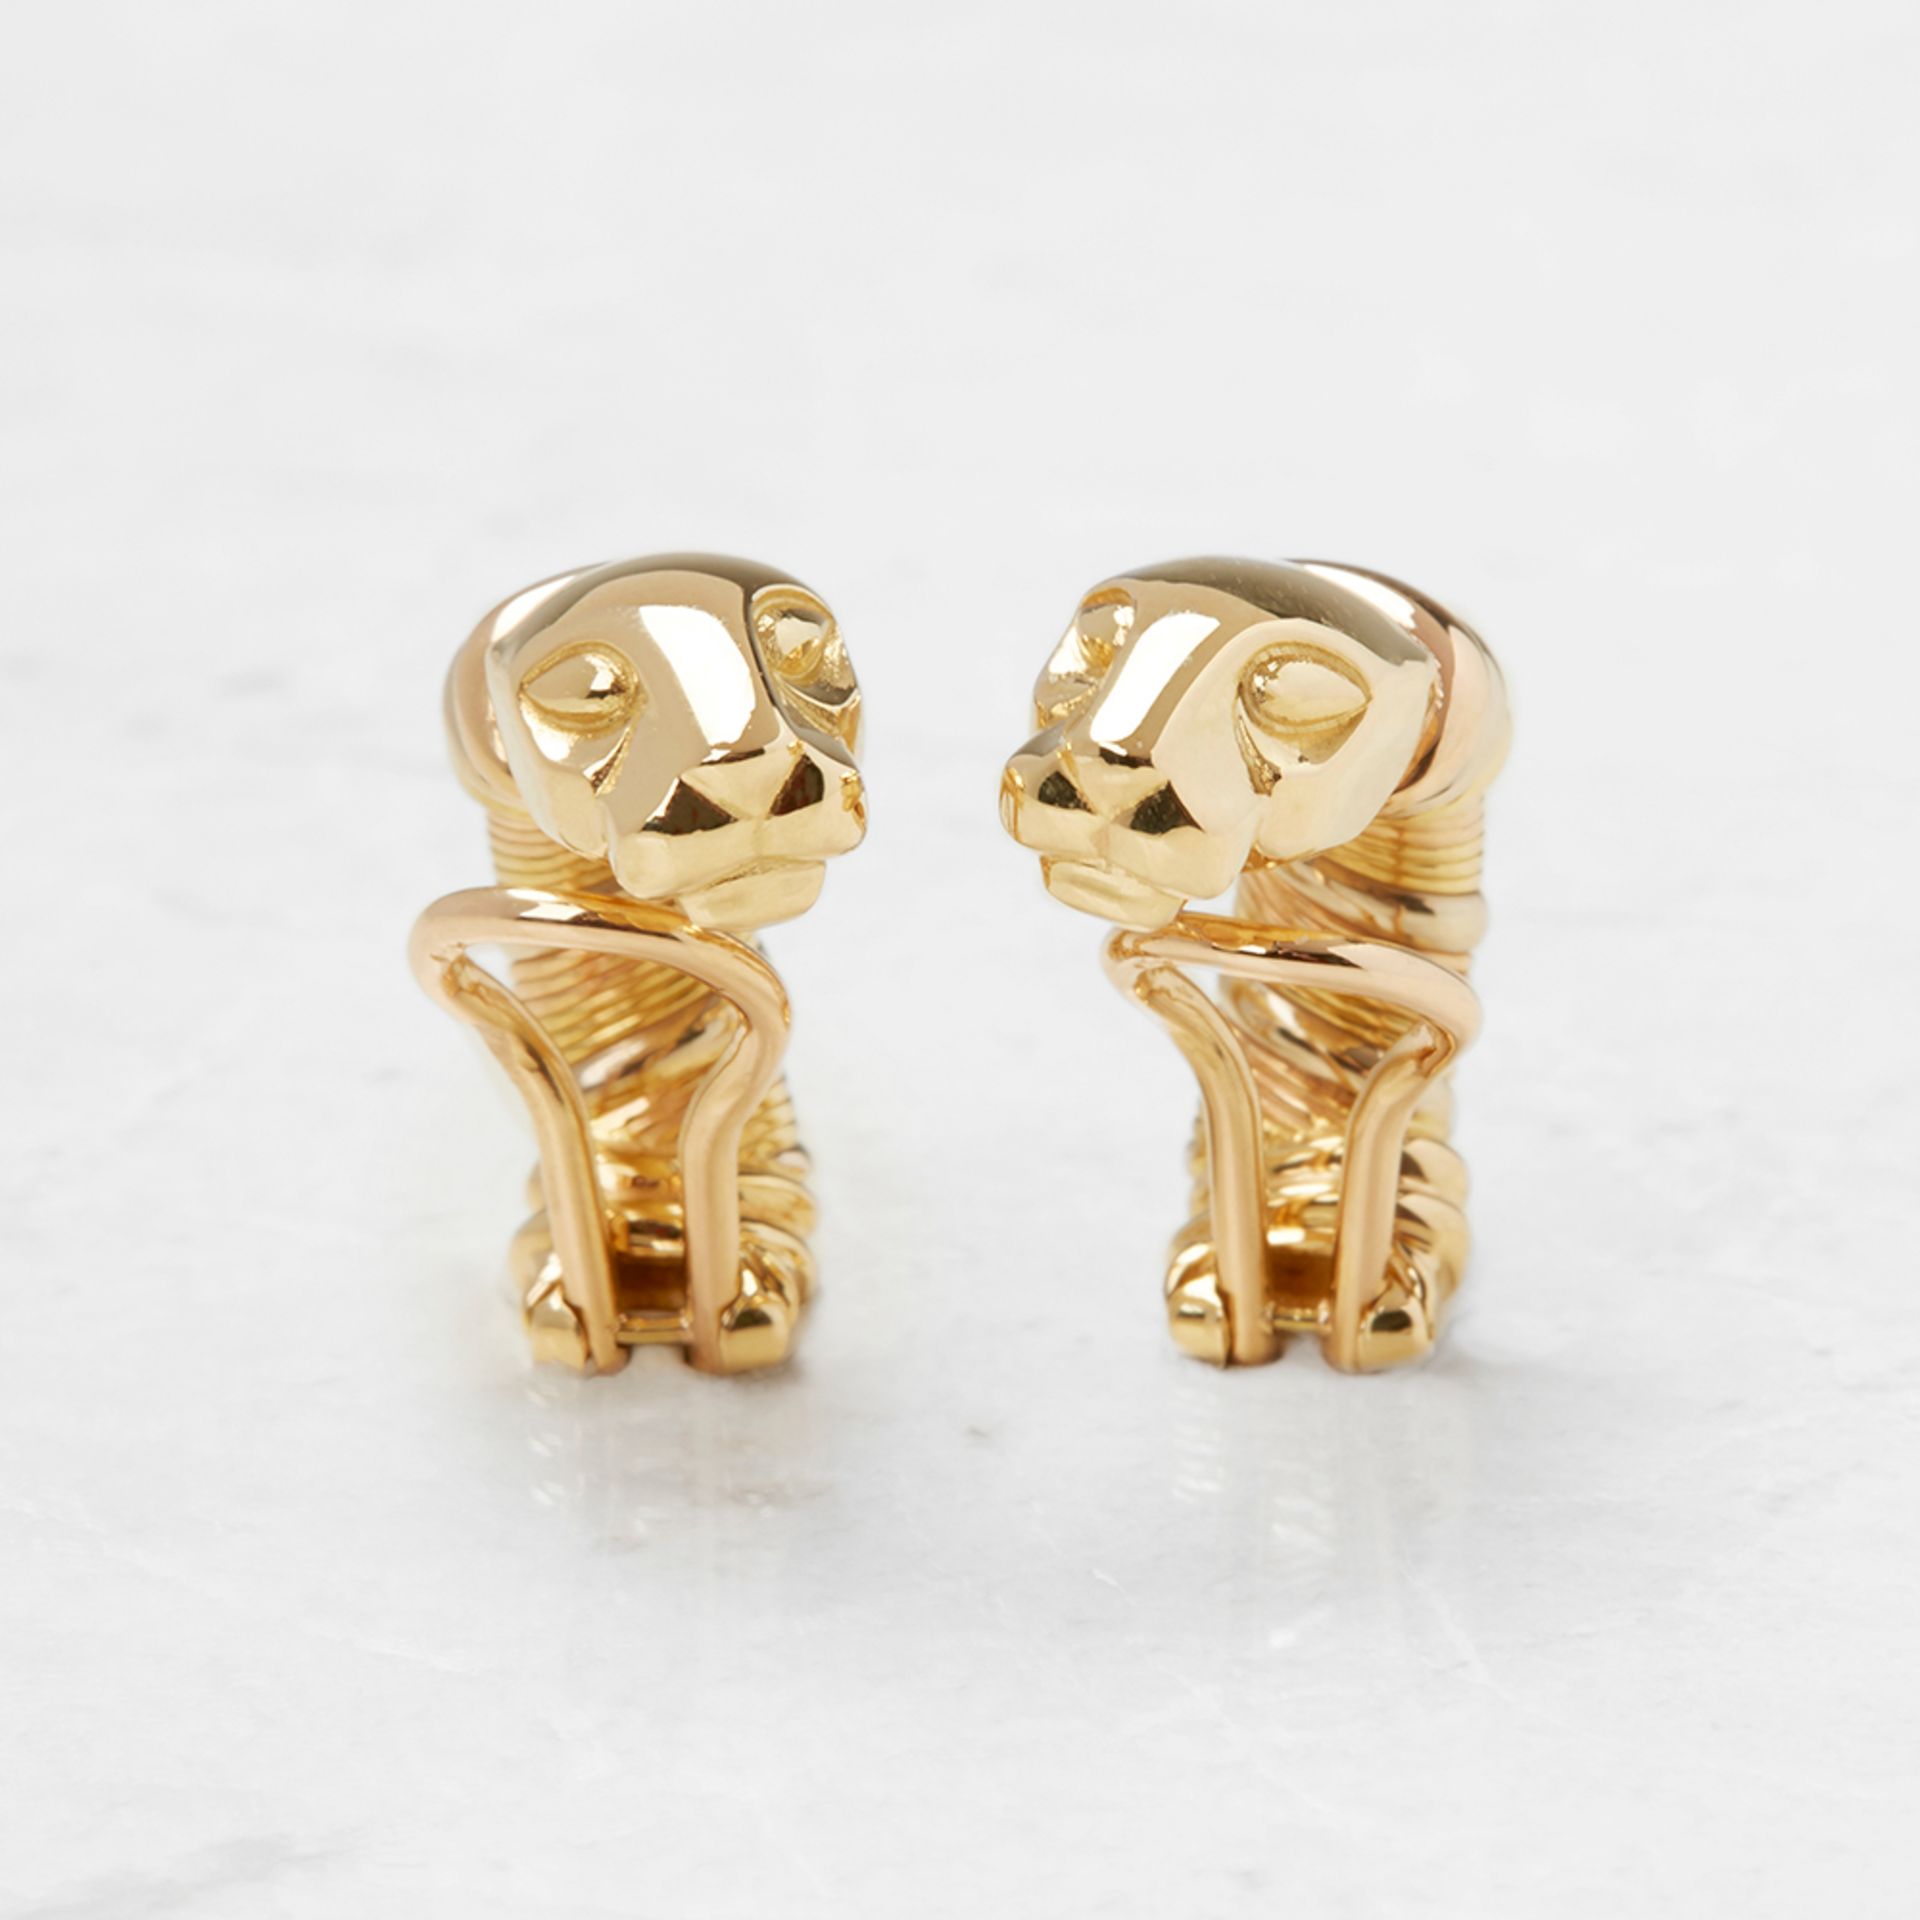 Cartier, 18k Yellow Gold Panthère Earrings - Image 3 of 8